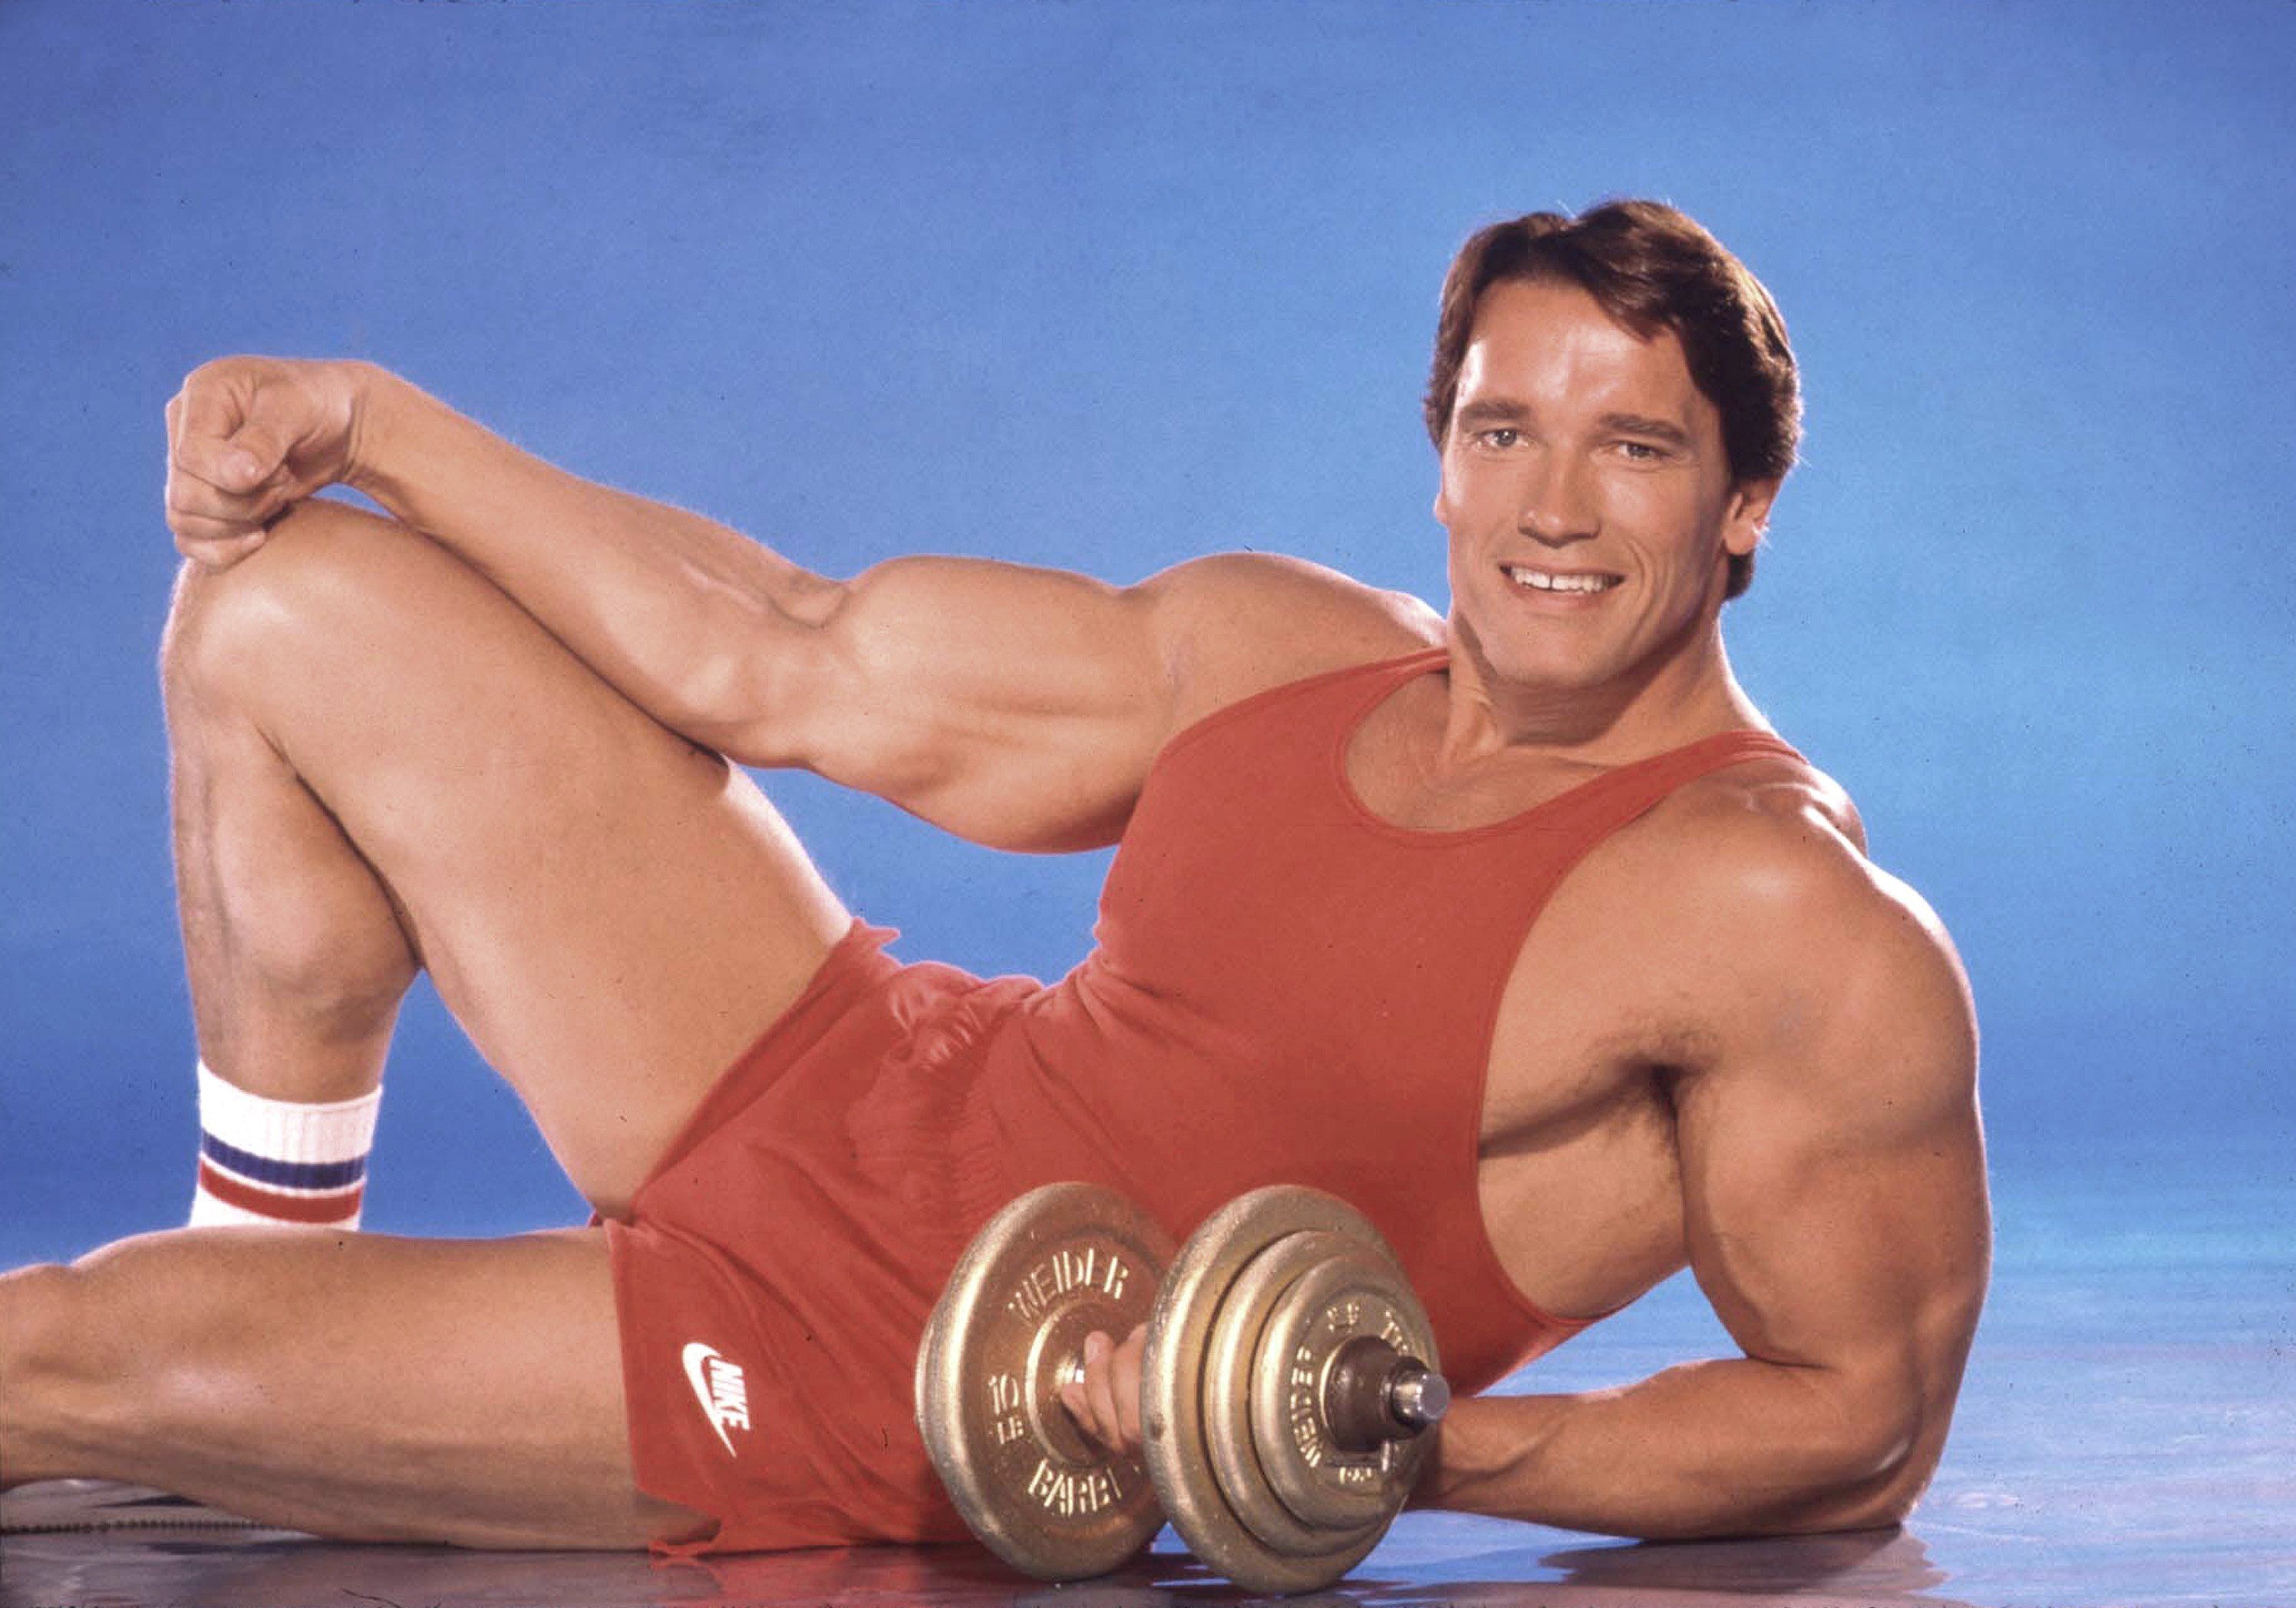 body-builder-actor-and-future-governor-of-california-arnold-news-photo-1589465525.jpg